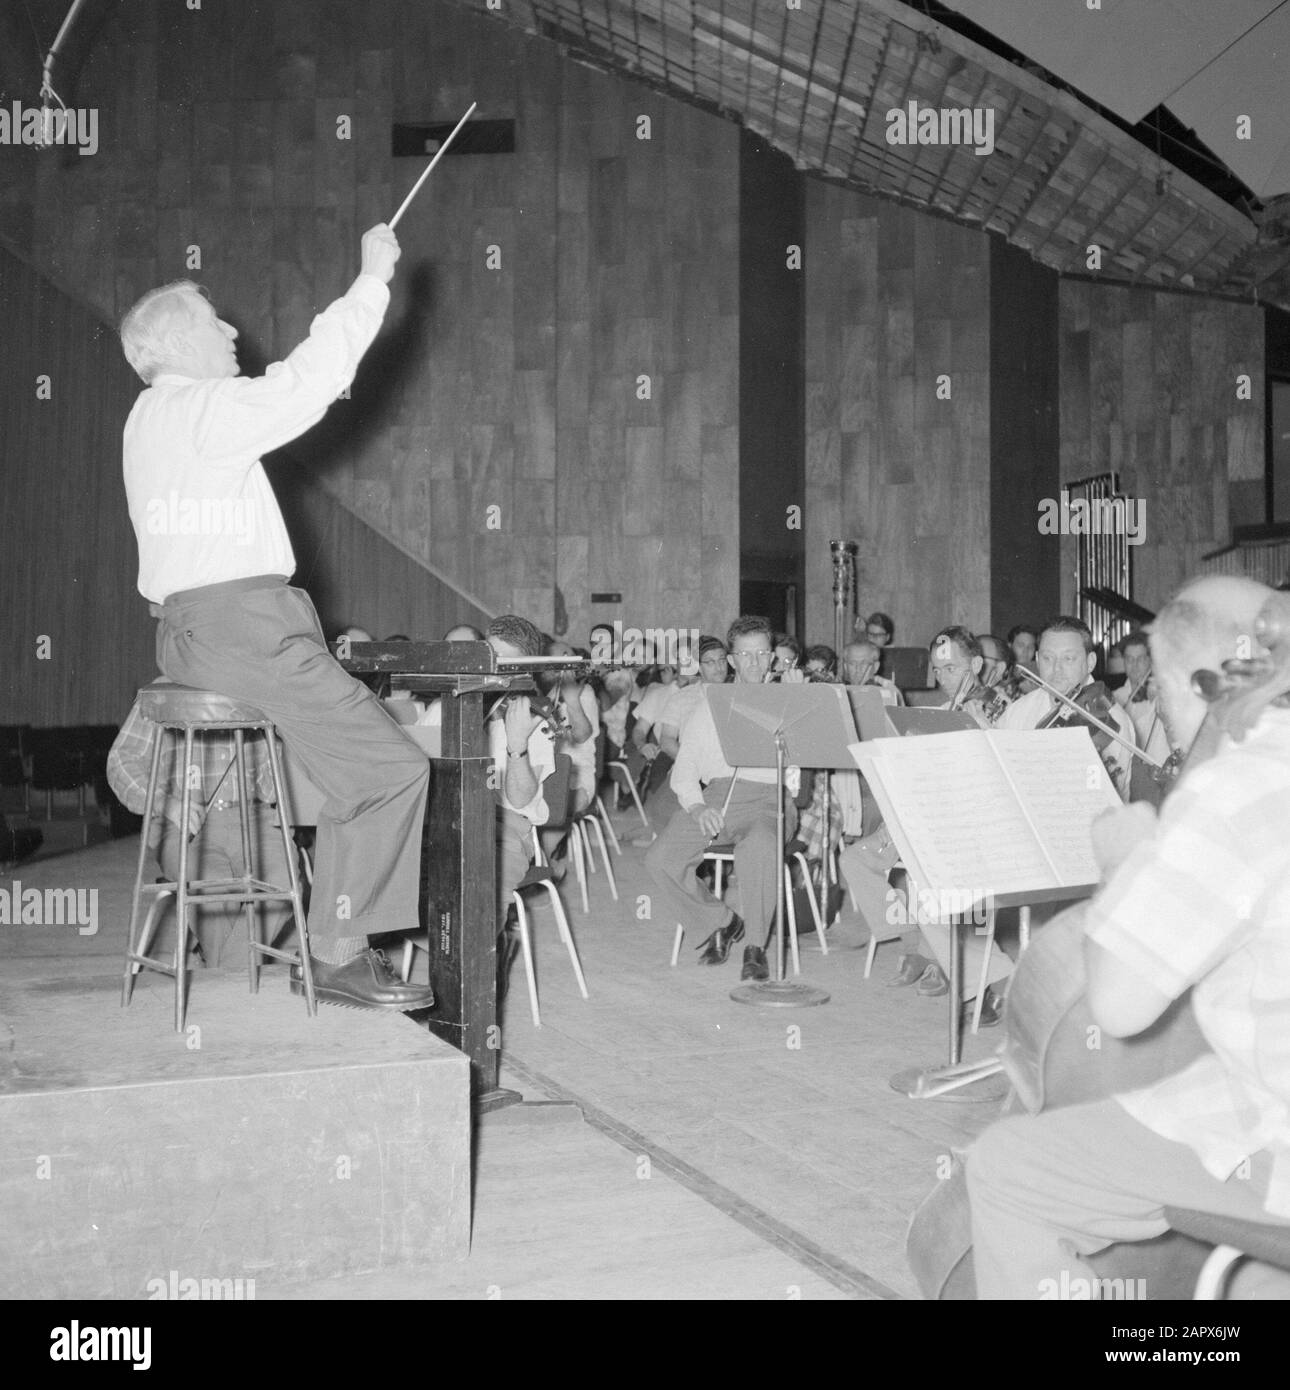 Israel 1964-1965: Tel Aviv, orchestra  Rehearsal of an orchestra, presumably the Israel Philharmonic Orchestra in the Mann auditorium Date: 1964 Location: Israel, Tel Aviv Keywords: conductors, interiors, music, orchestras, rehearsals Personal name: Münch, Charles Stock Photo